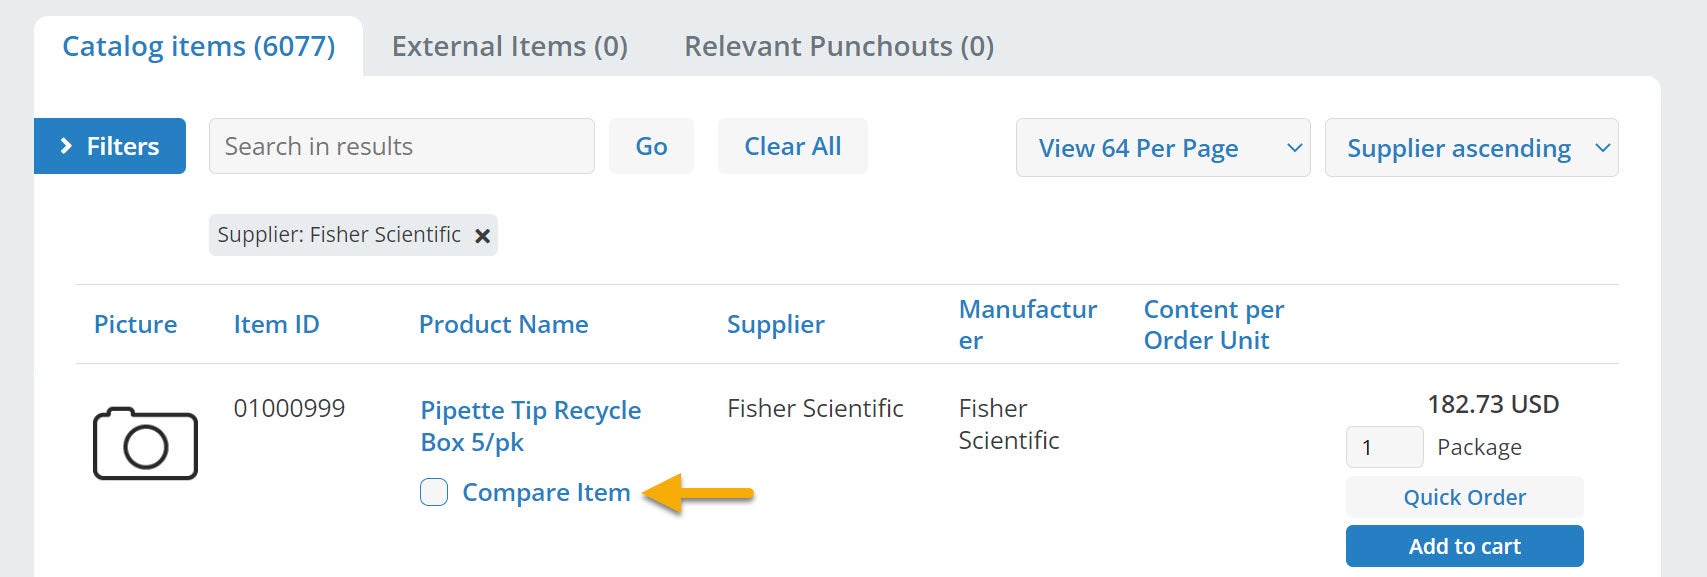 Check the Compare Item box found under the item’s name in the search results. 